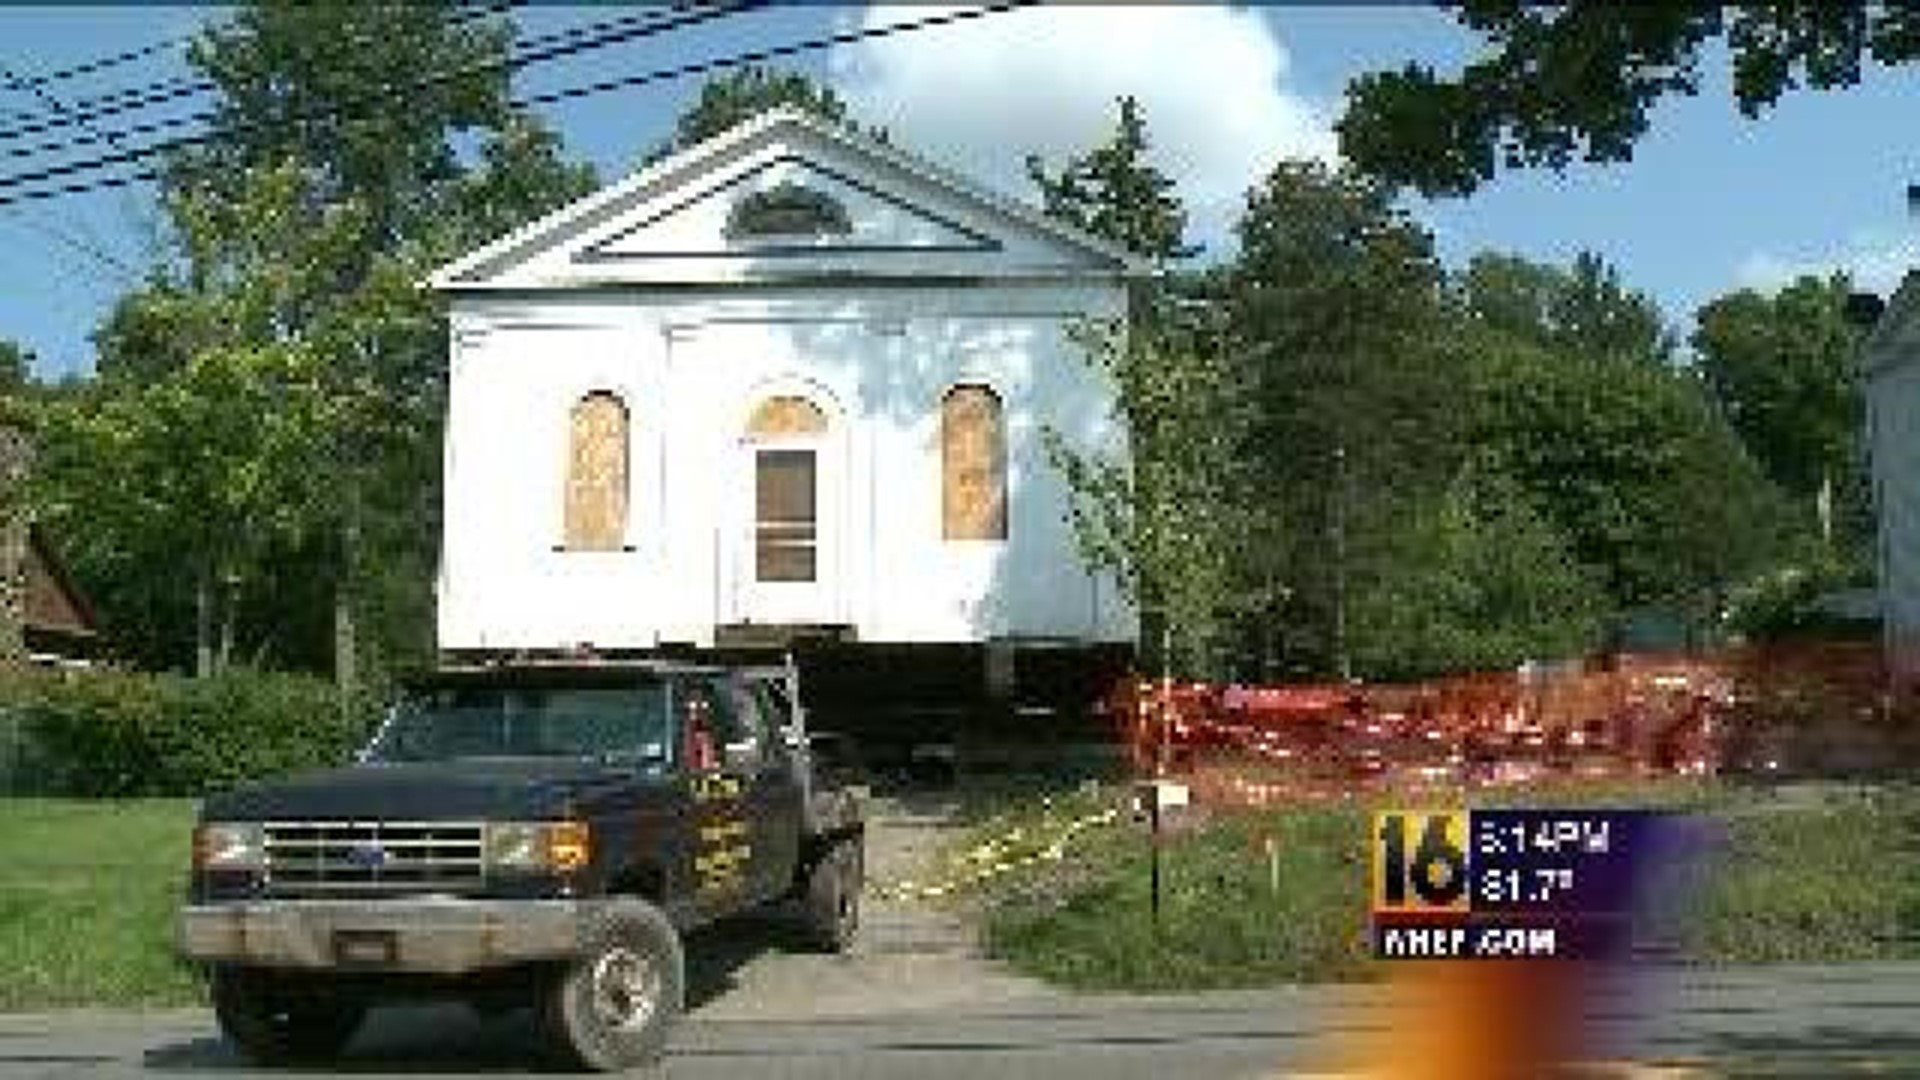 Historic Schoolhouse on the Move